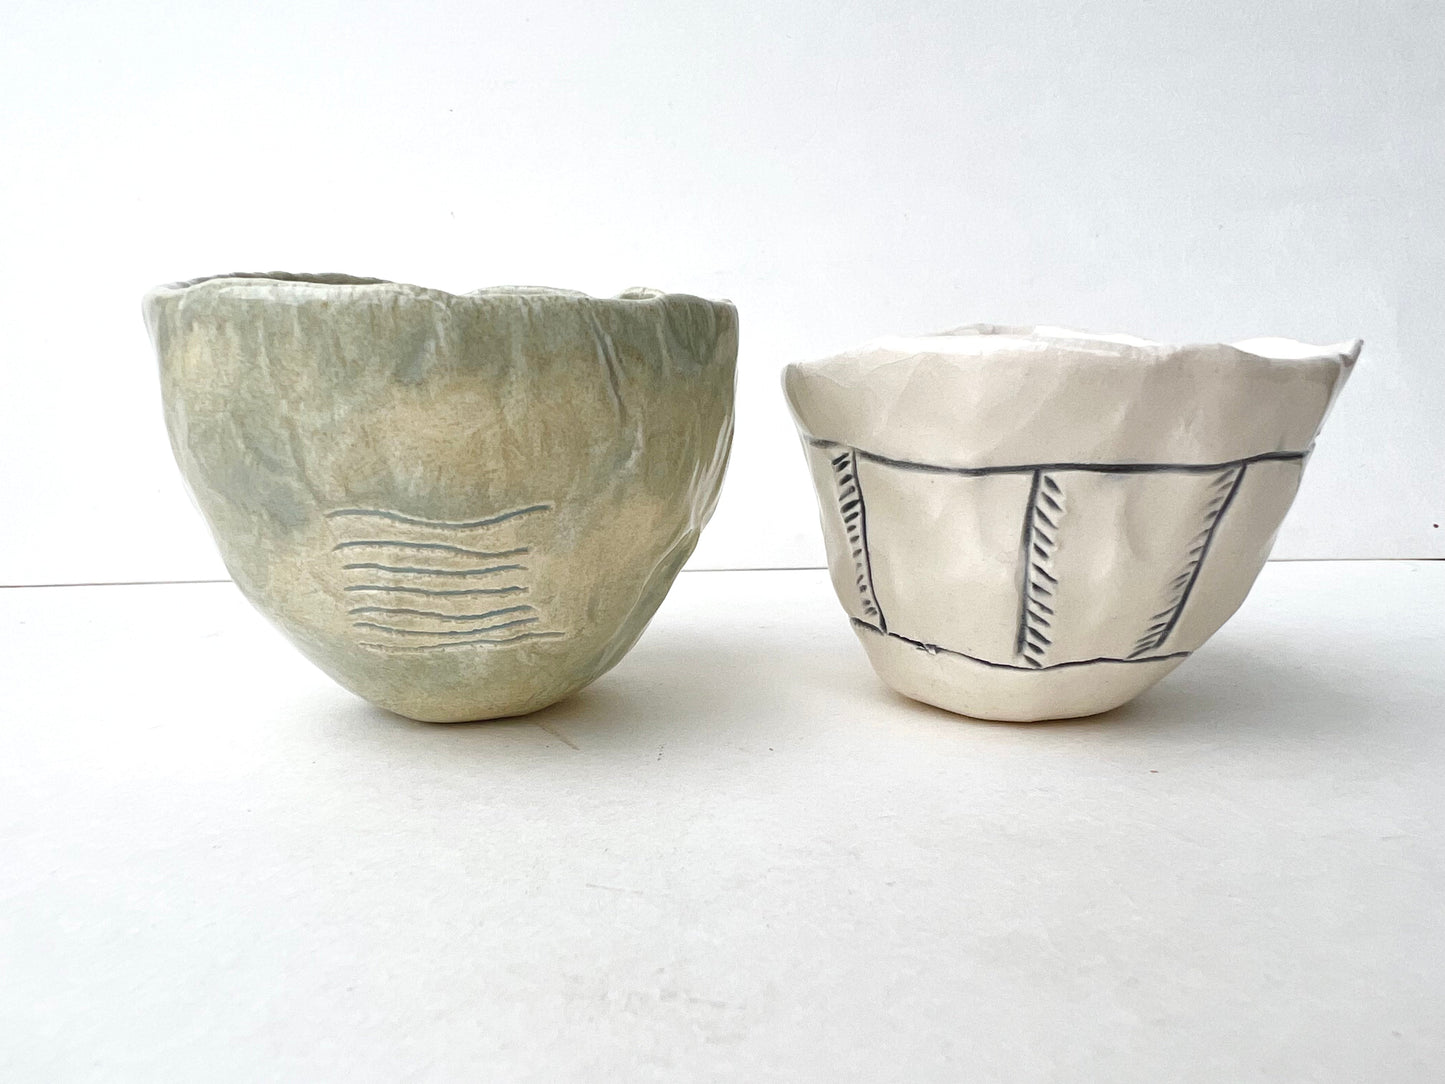 mottled river sgraffito cup/bowl samples/seconds/sale piece